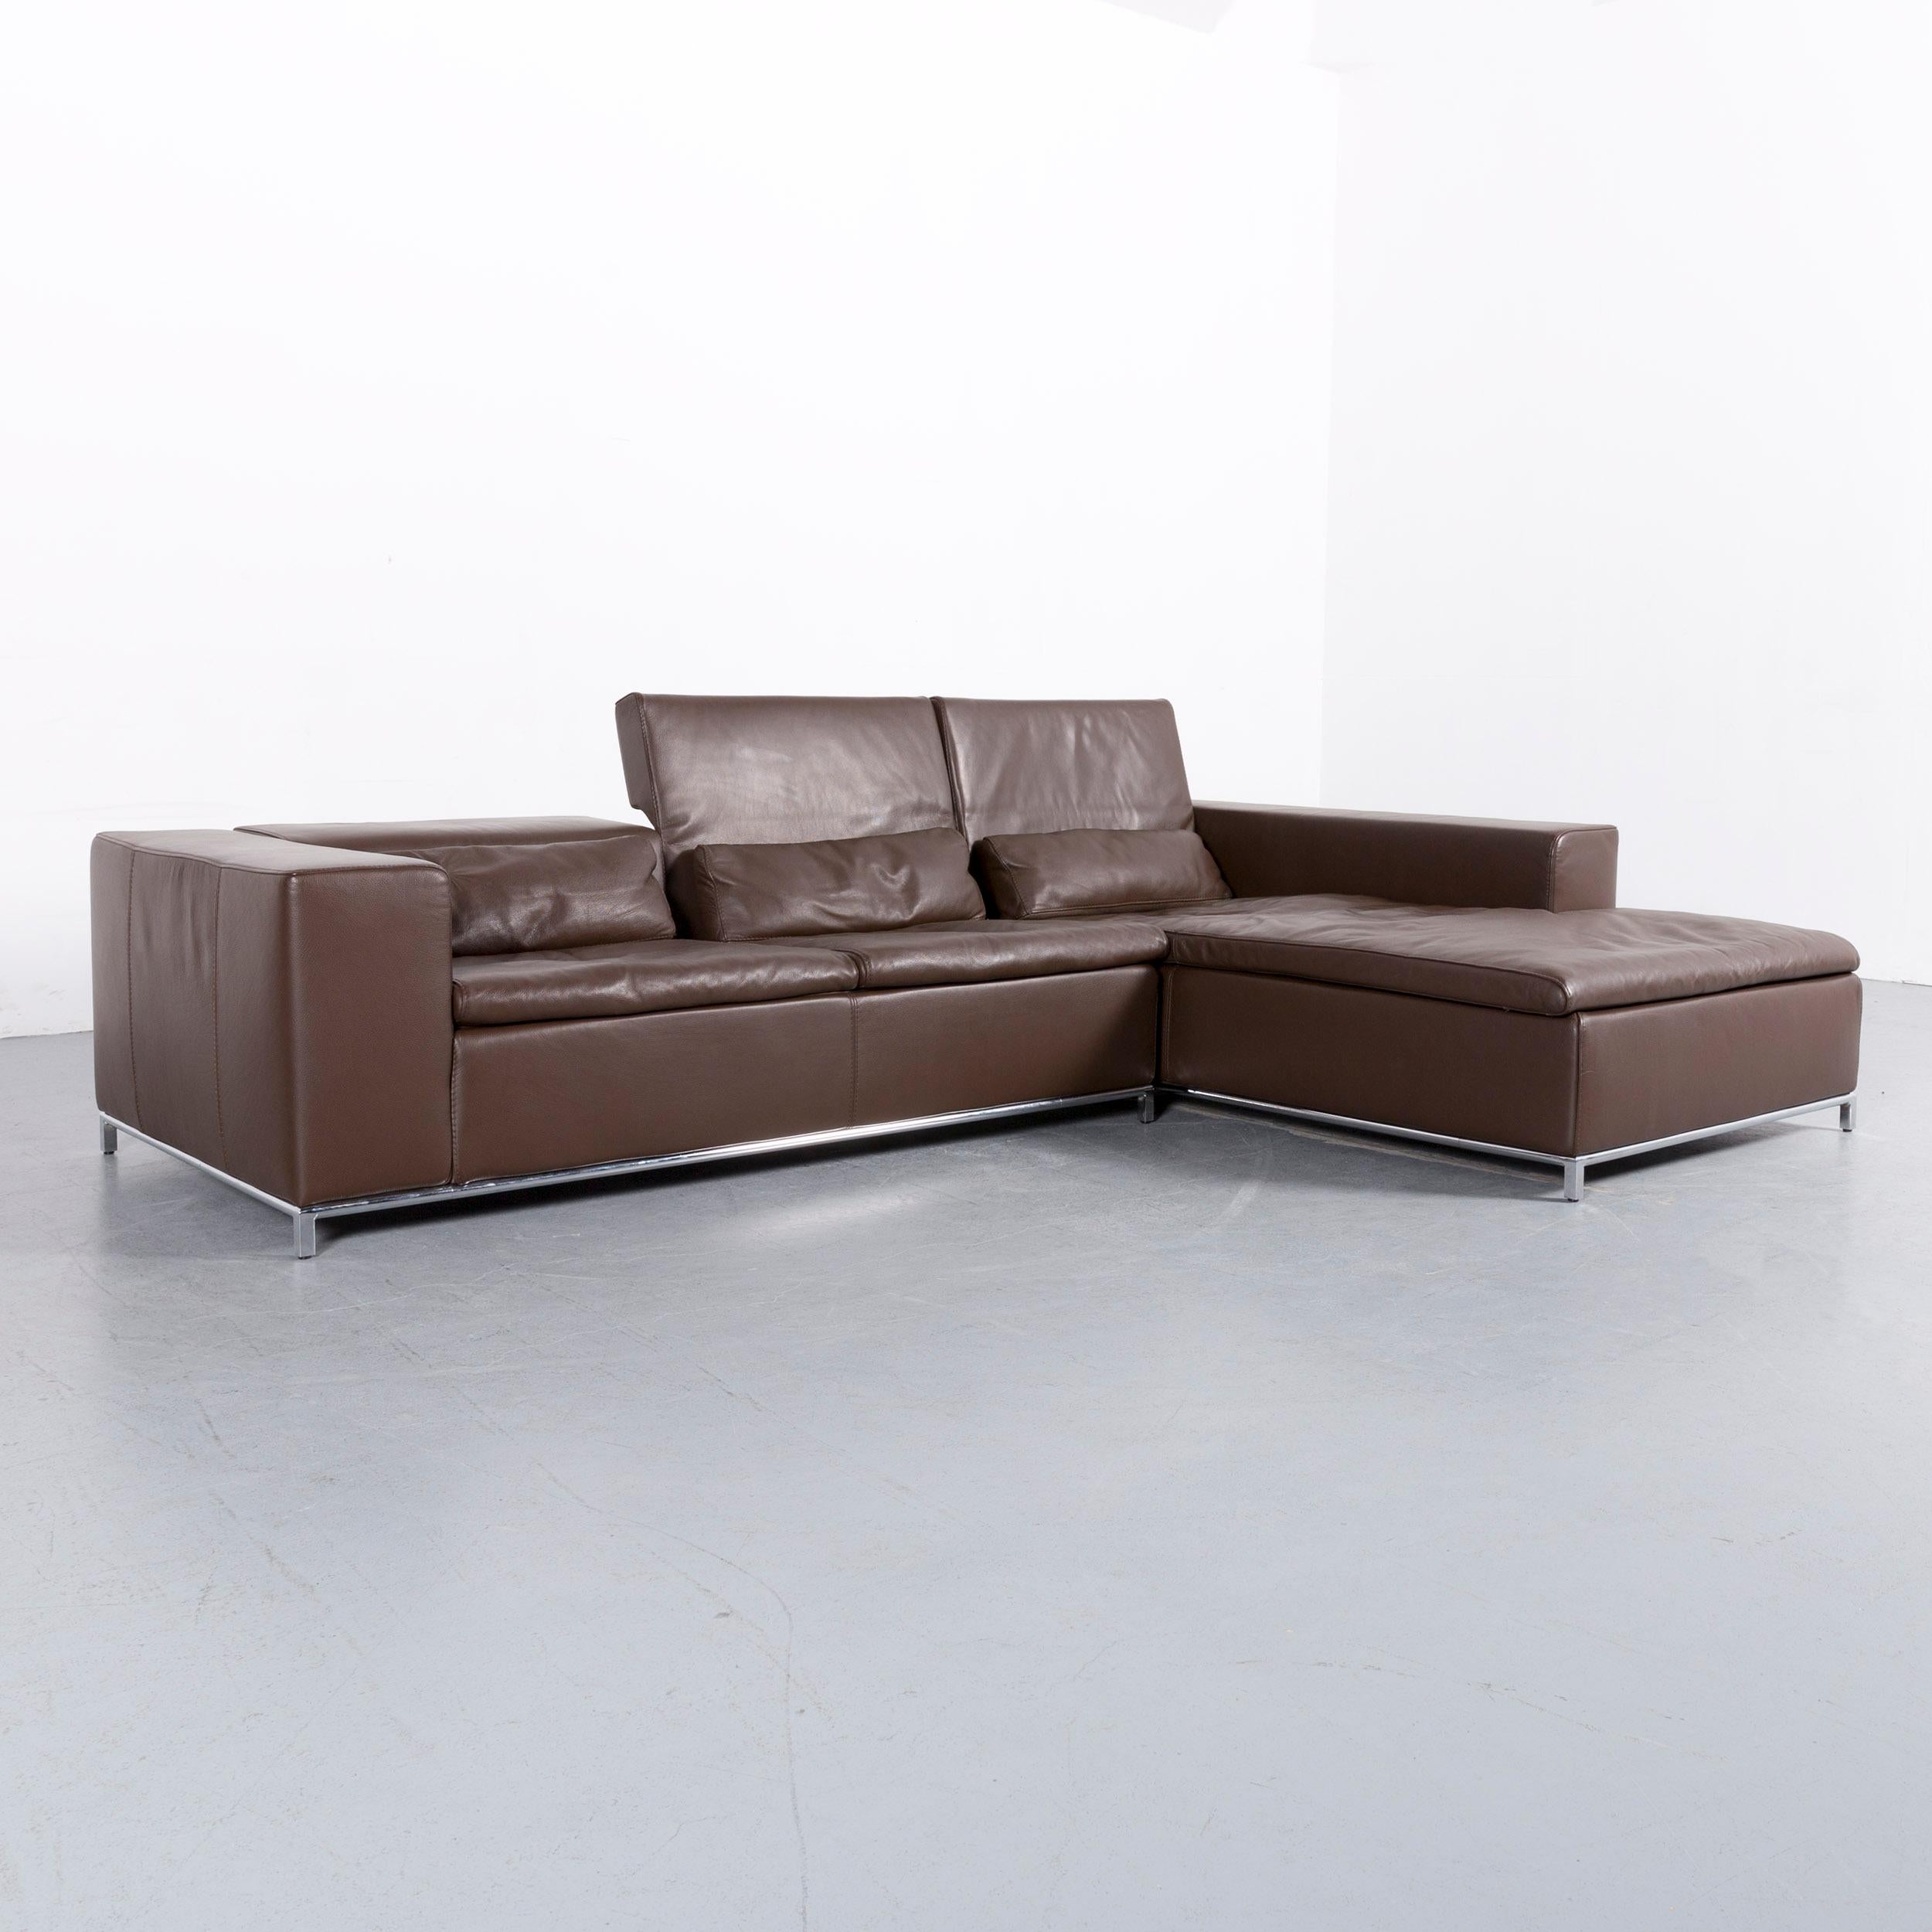 We bring to you an who's perfect boston corner sofa brown leather.













 